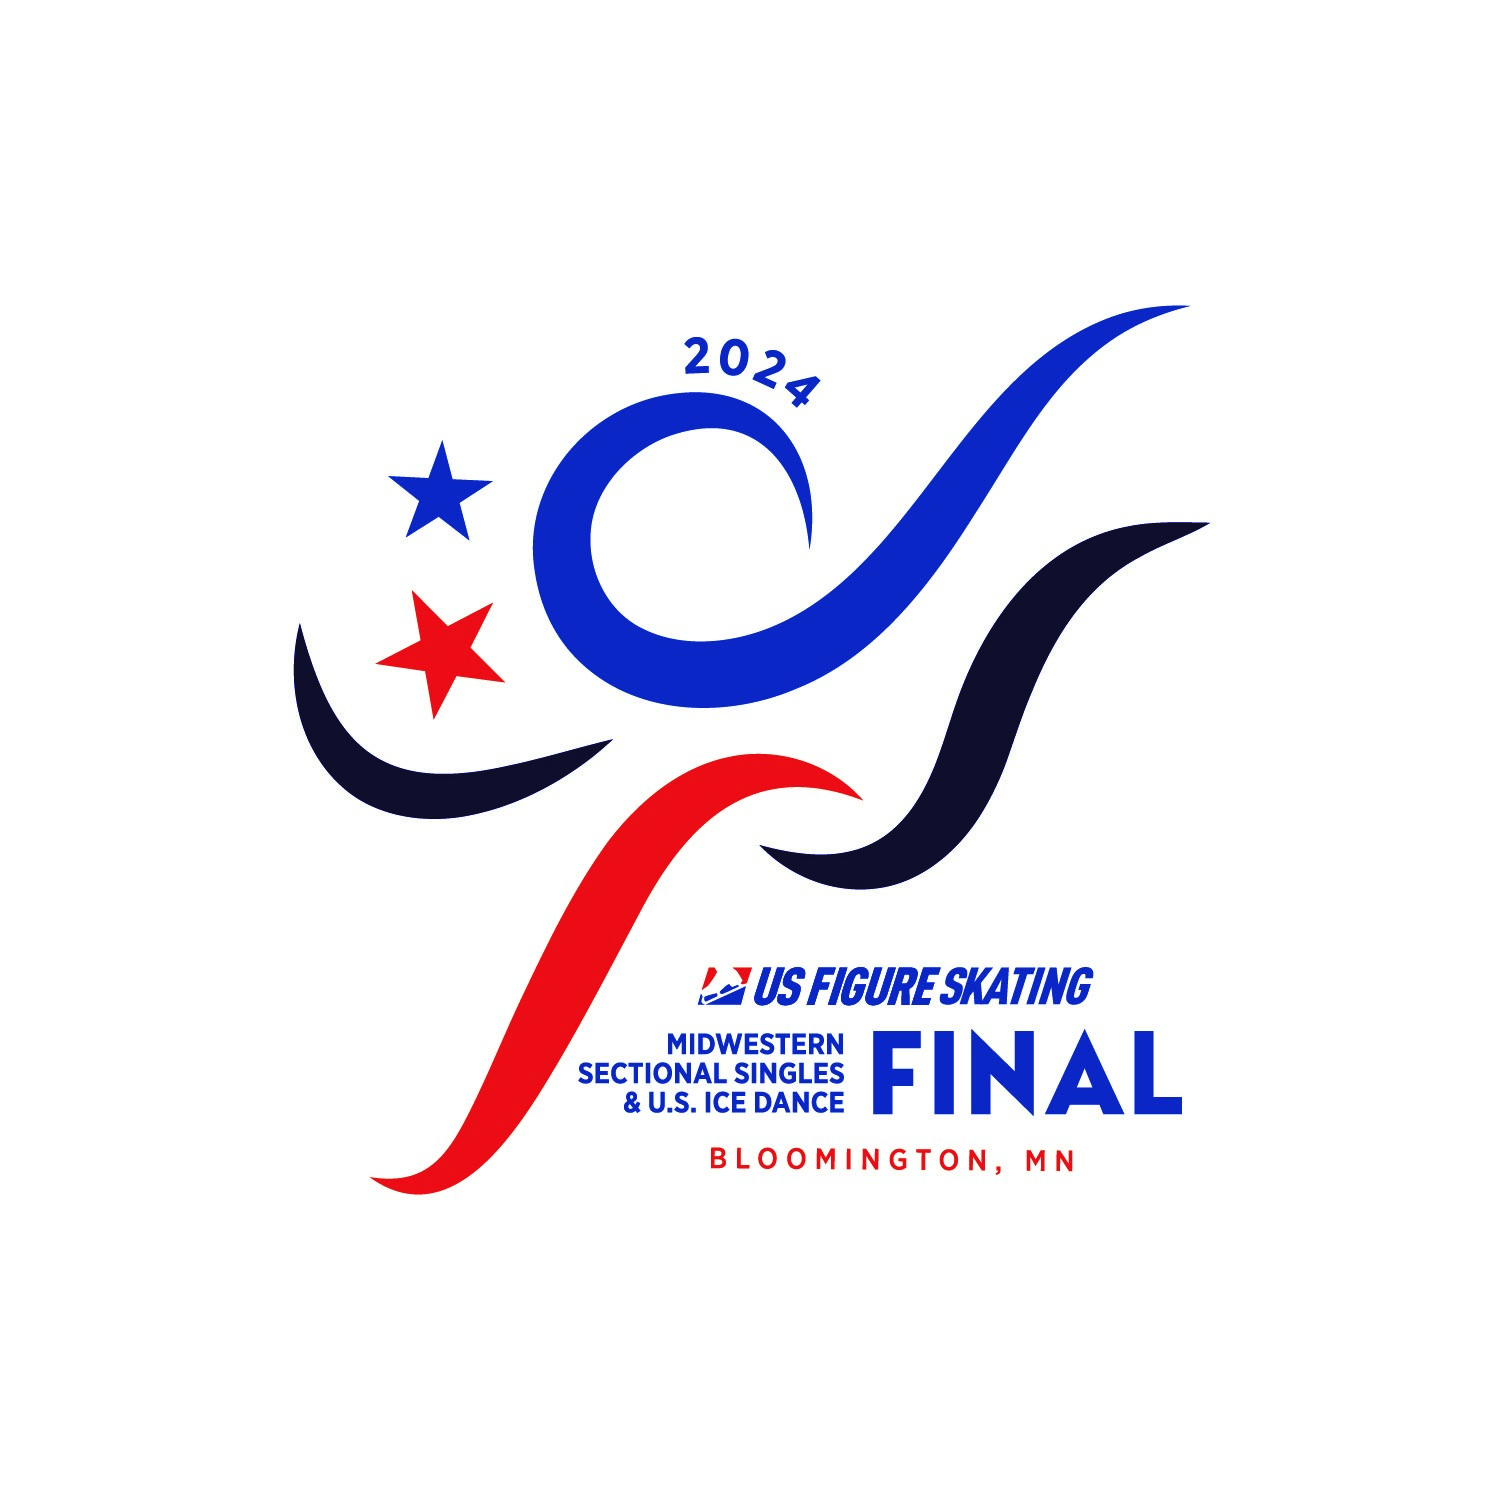 Midwestern Sectional Singles & U.S. Ice Dance Final City of